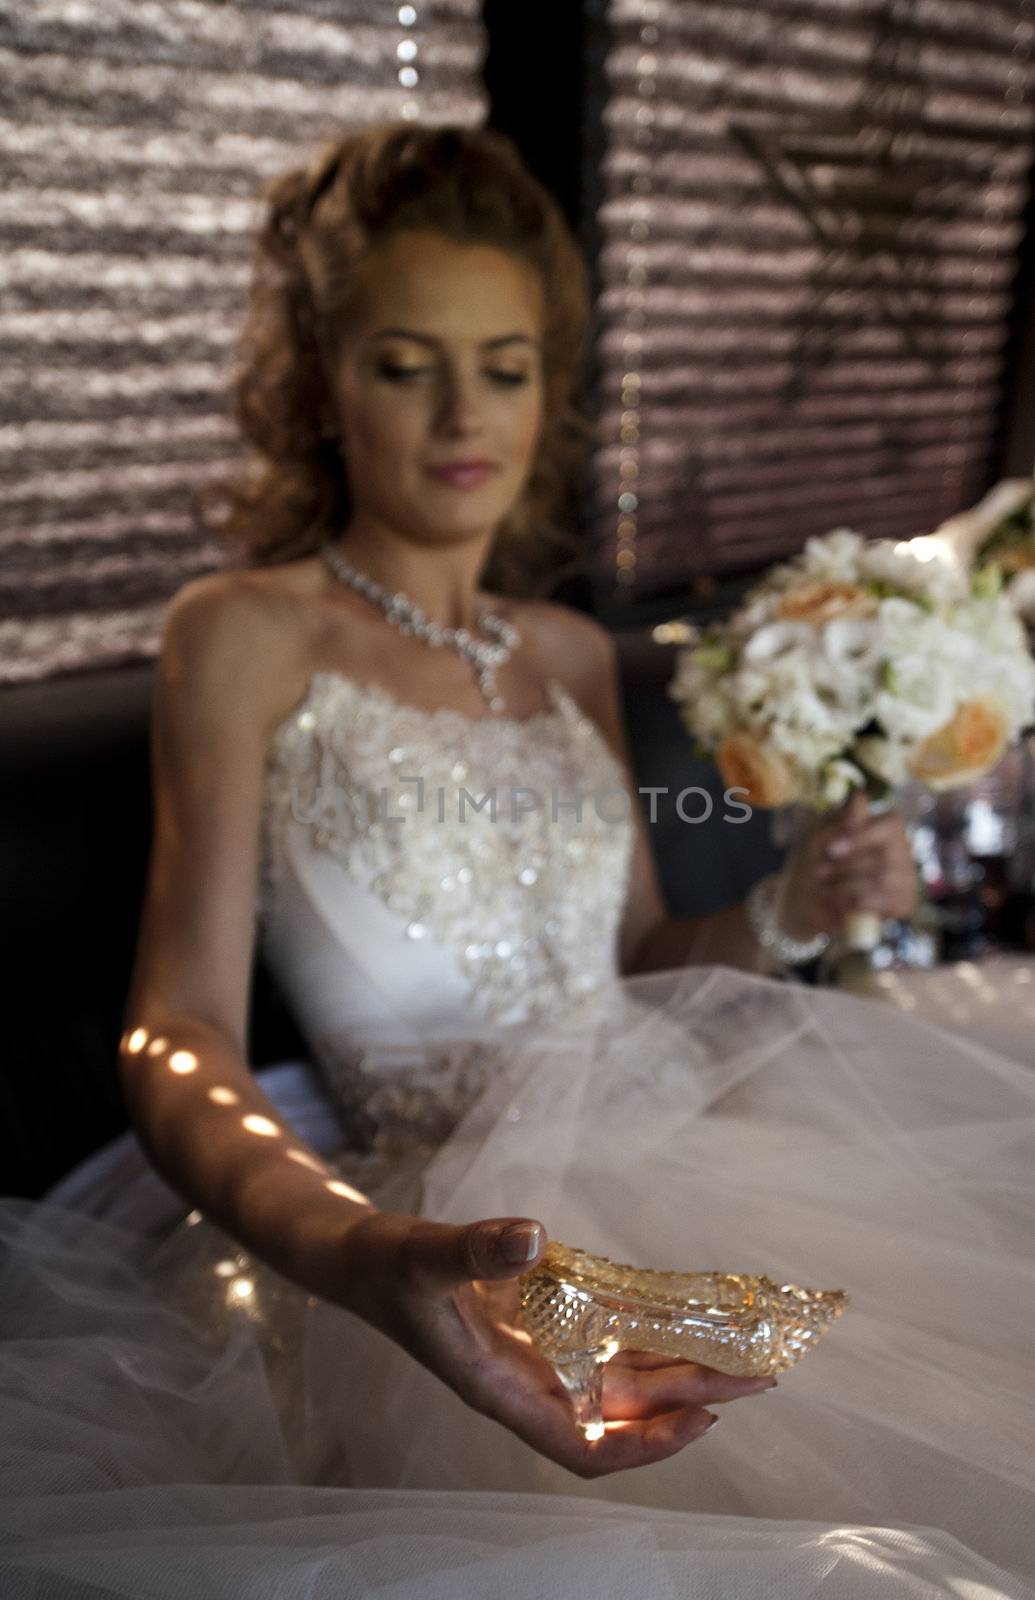 The bride with a crystal shoe. The bride in a wedding dress sits in a limousine holds a crystal shoe.